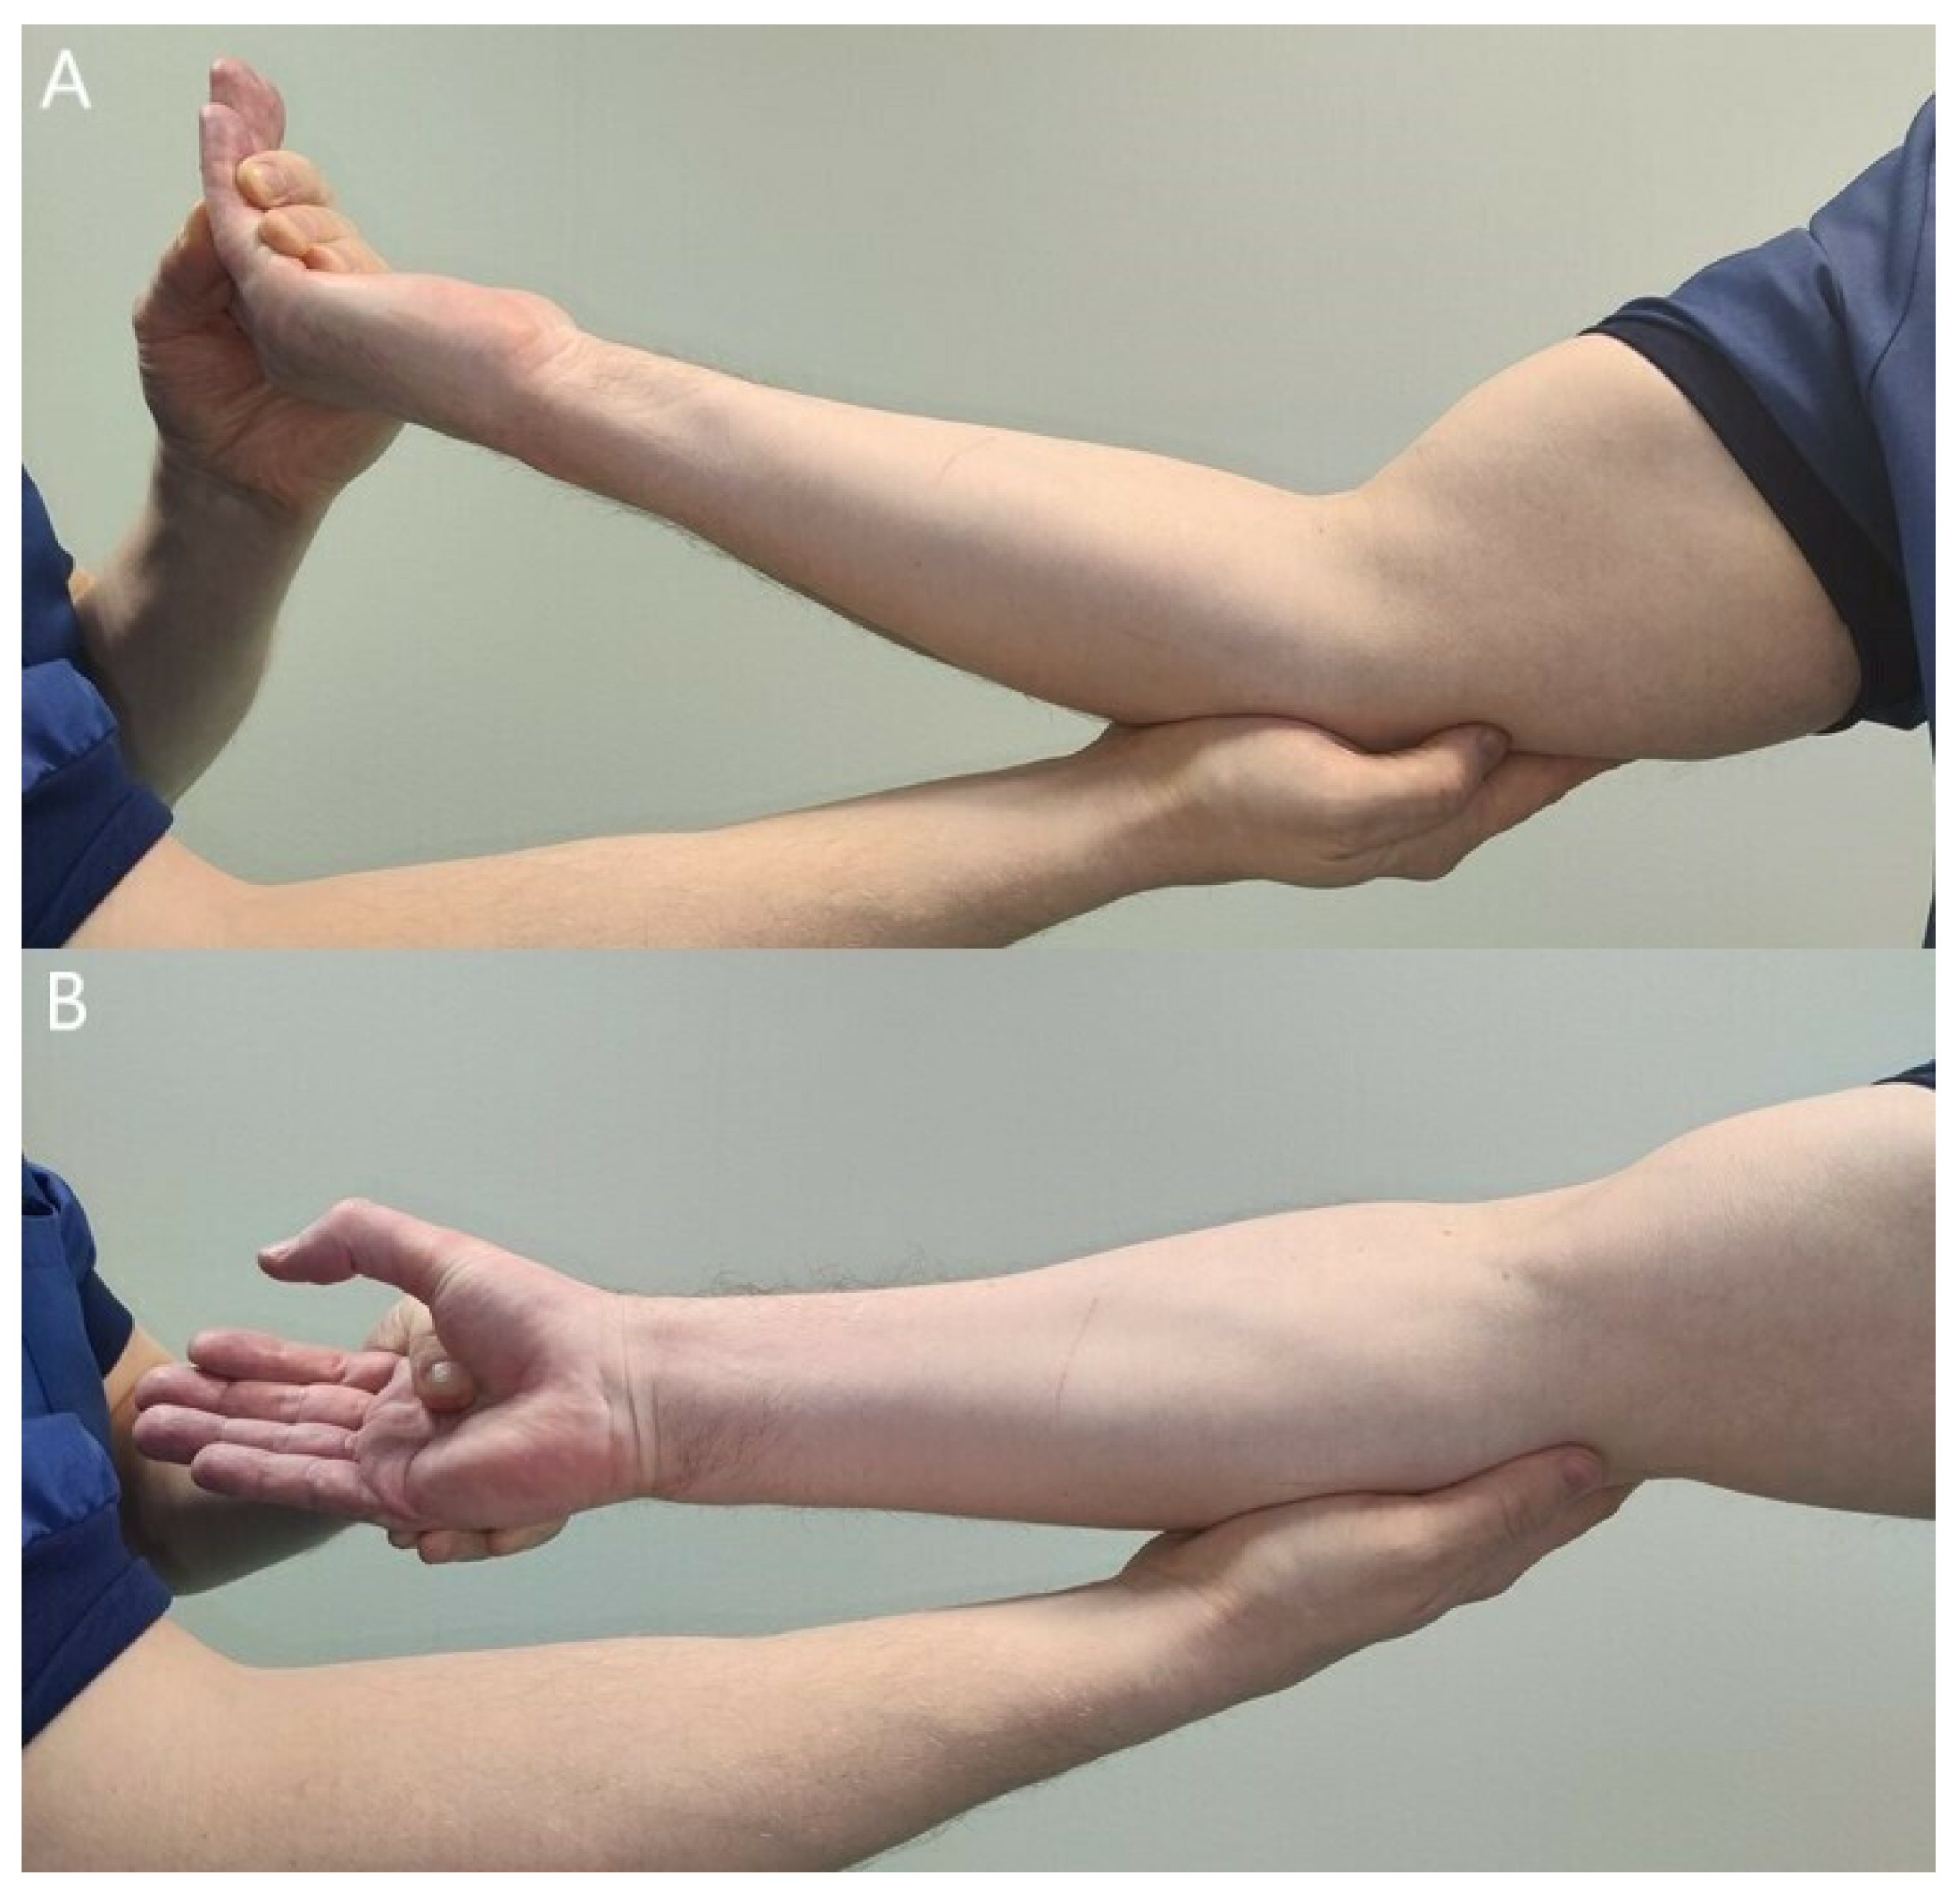 Differentiating Proximal Median Nerve Entrapment from CTS